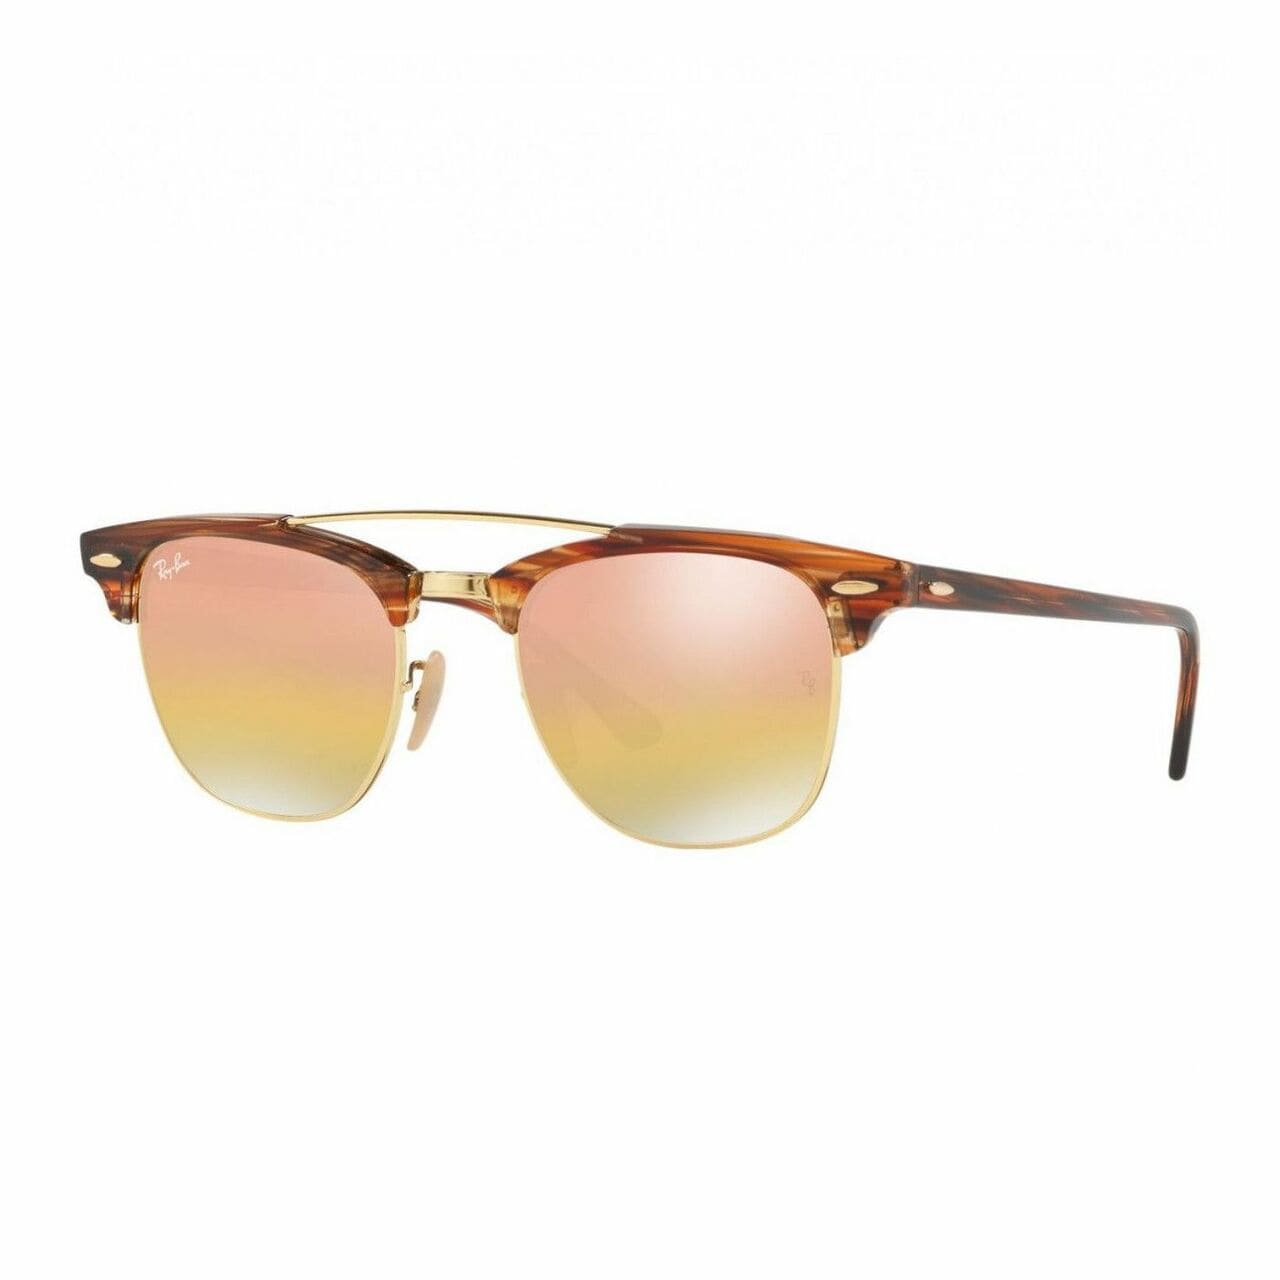 Ray-Ban RB3816-1237I1 Clubmaster Light Brown Browline Pink Gradient Mirror Lens Sunglasses 8053672851045